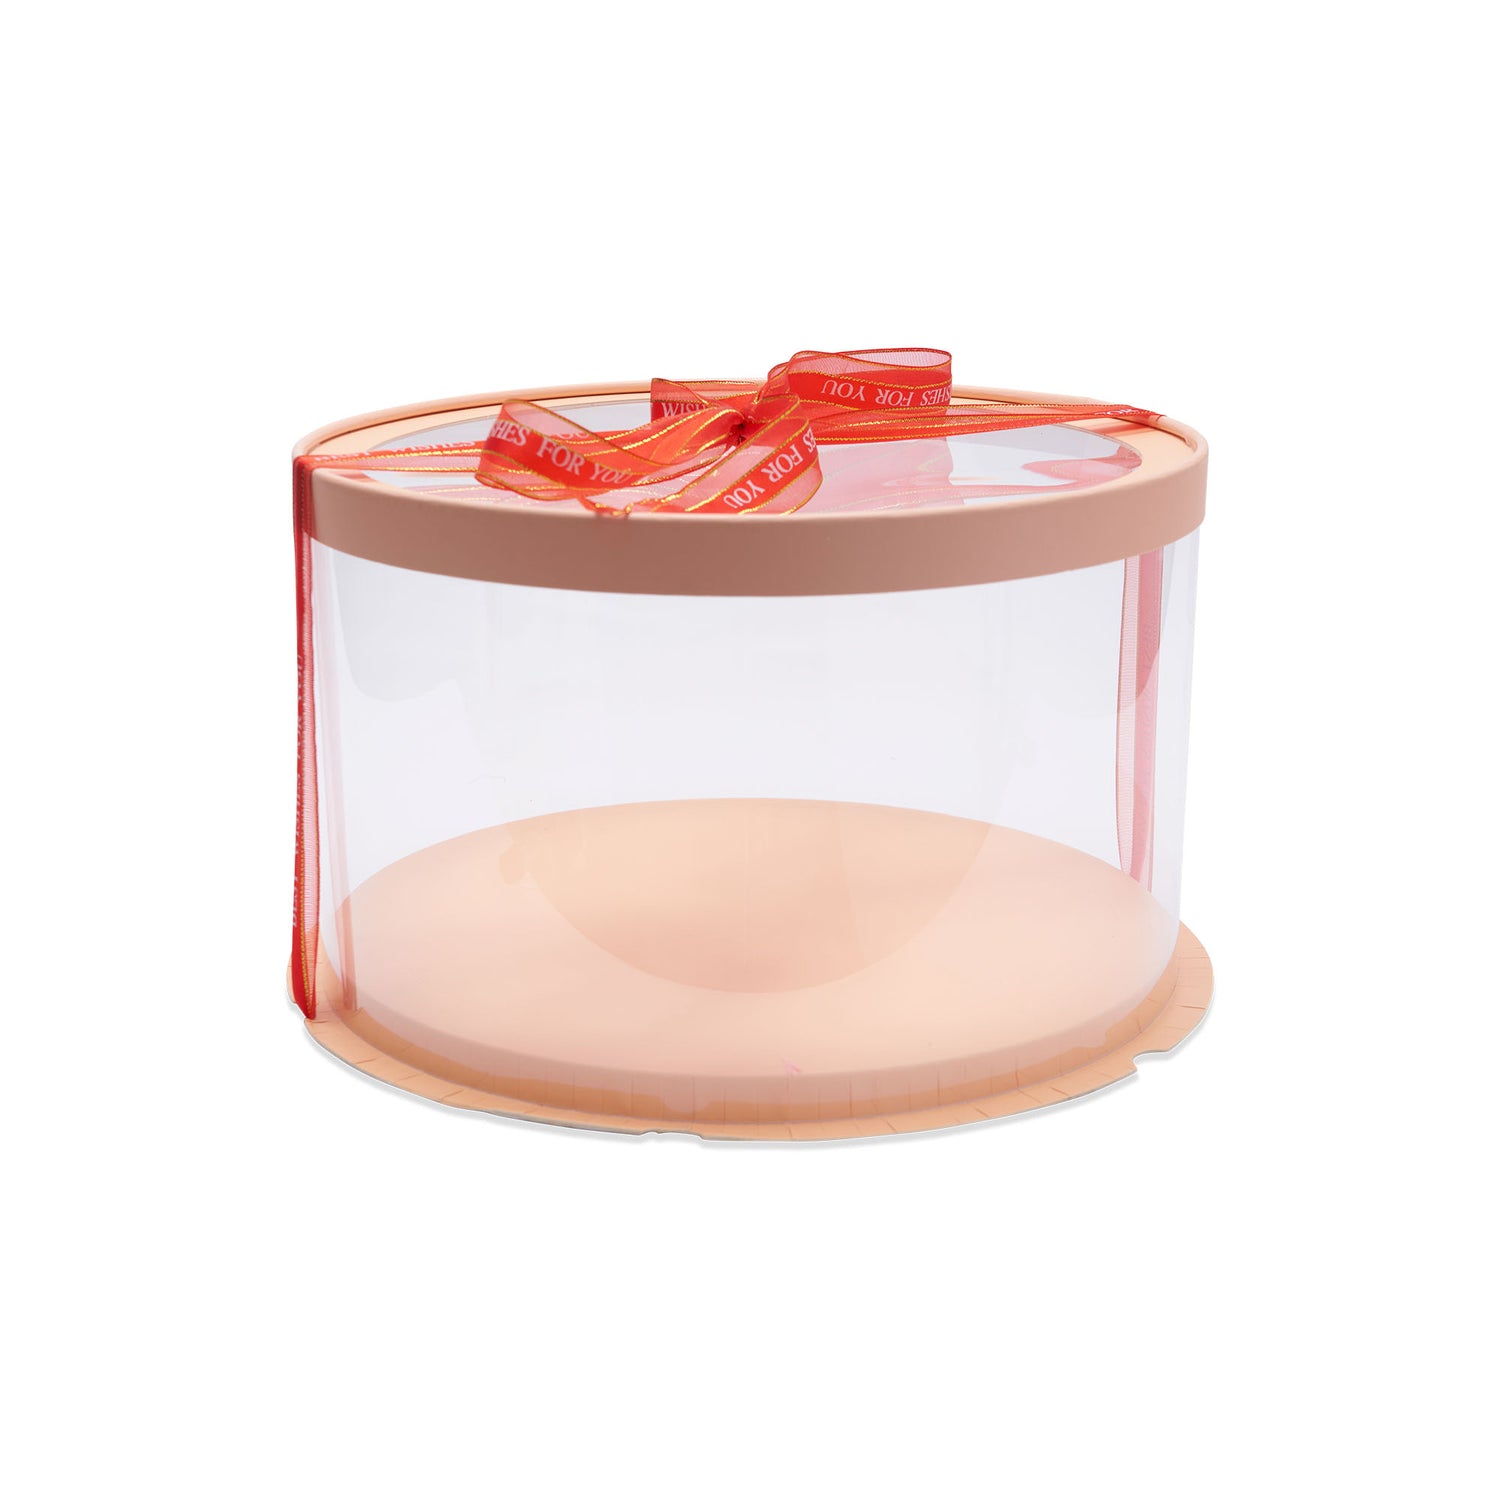 Transparent Cake Box With Red Bow